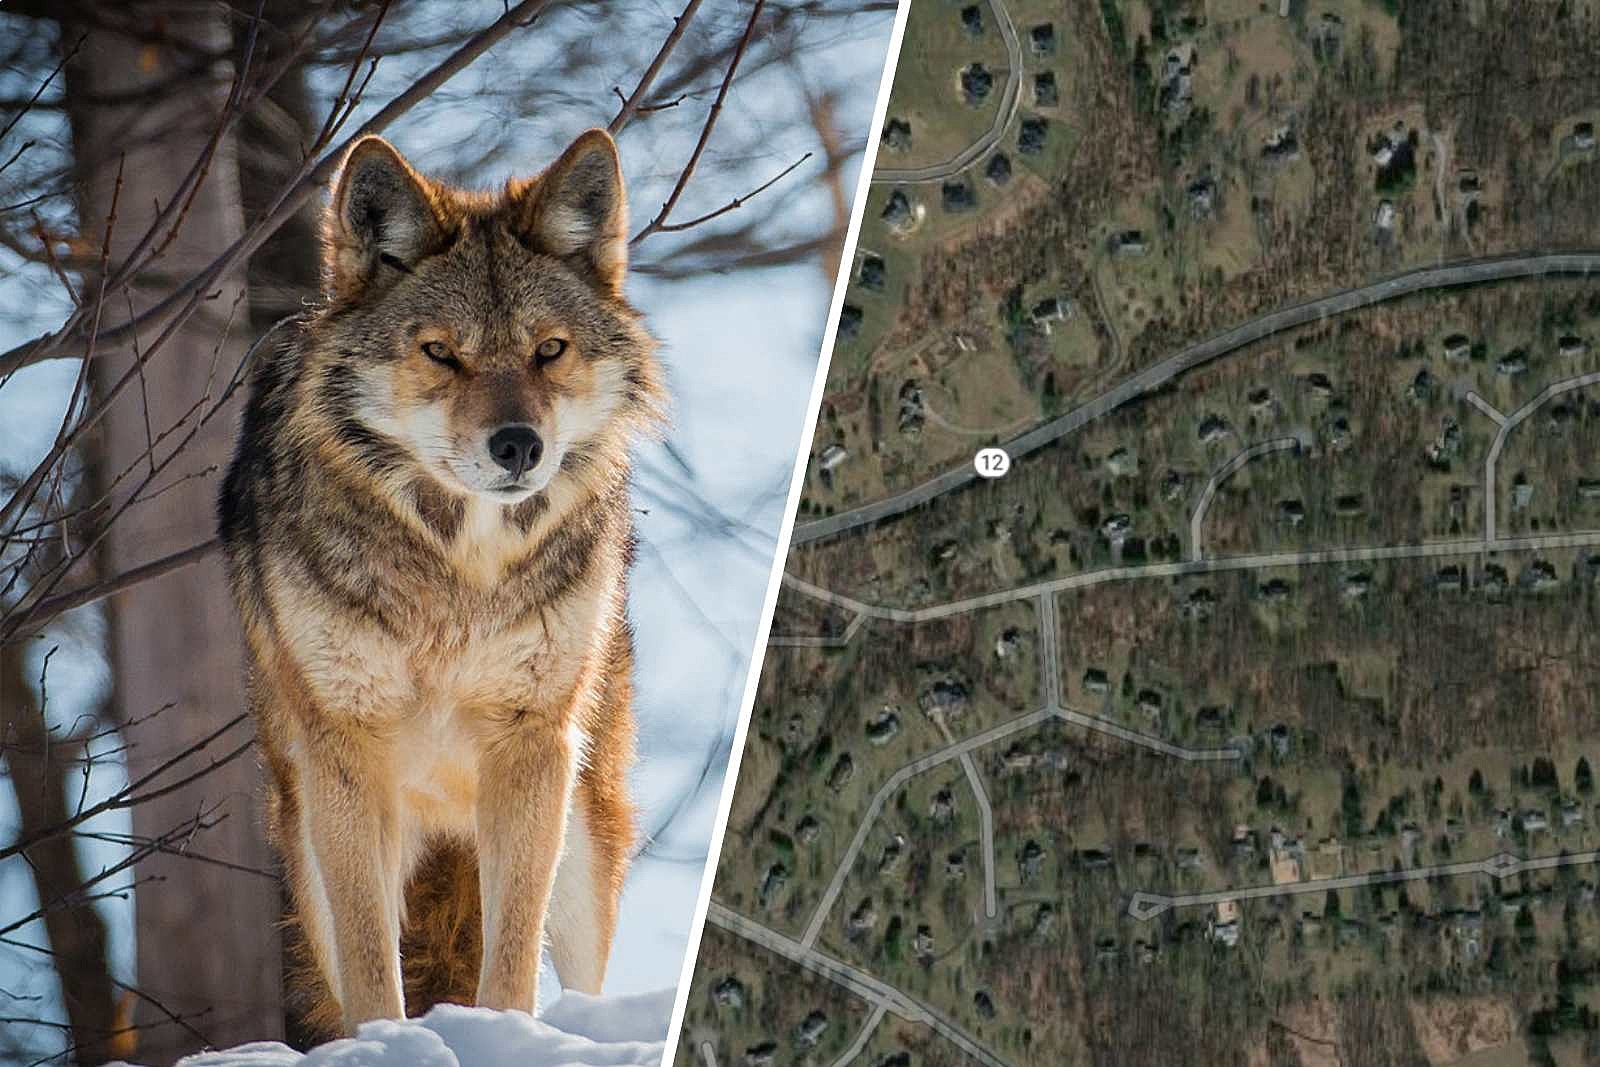 If you're not seeing coyotes in NJ, they're seeing you